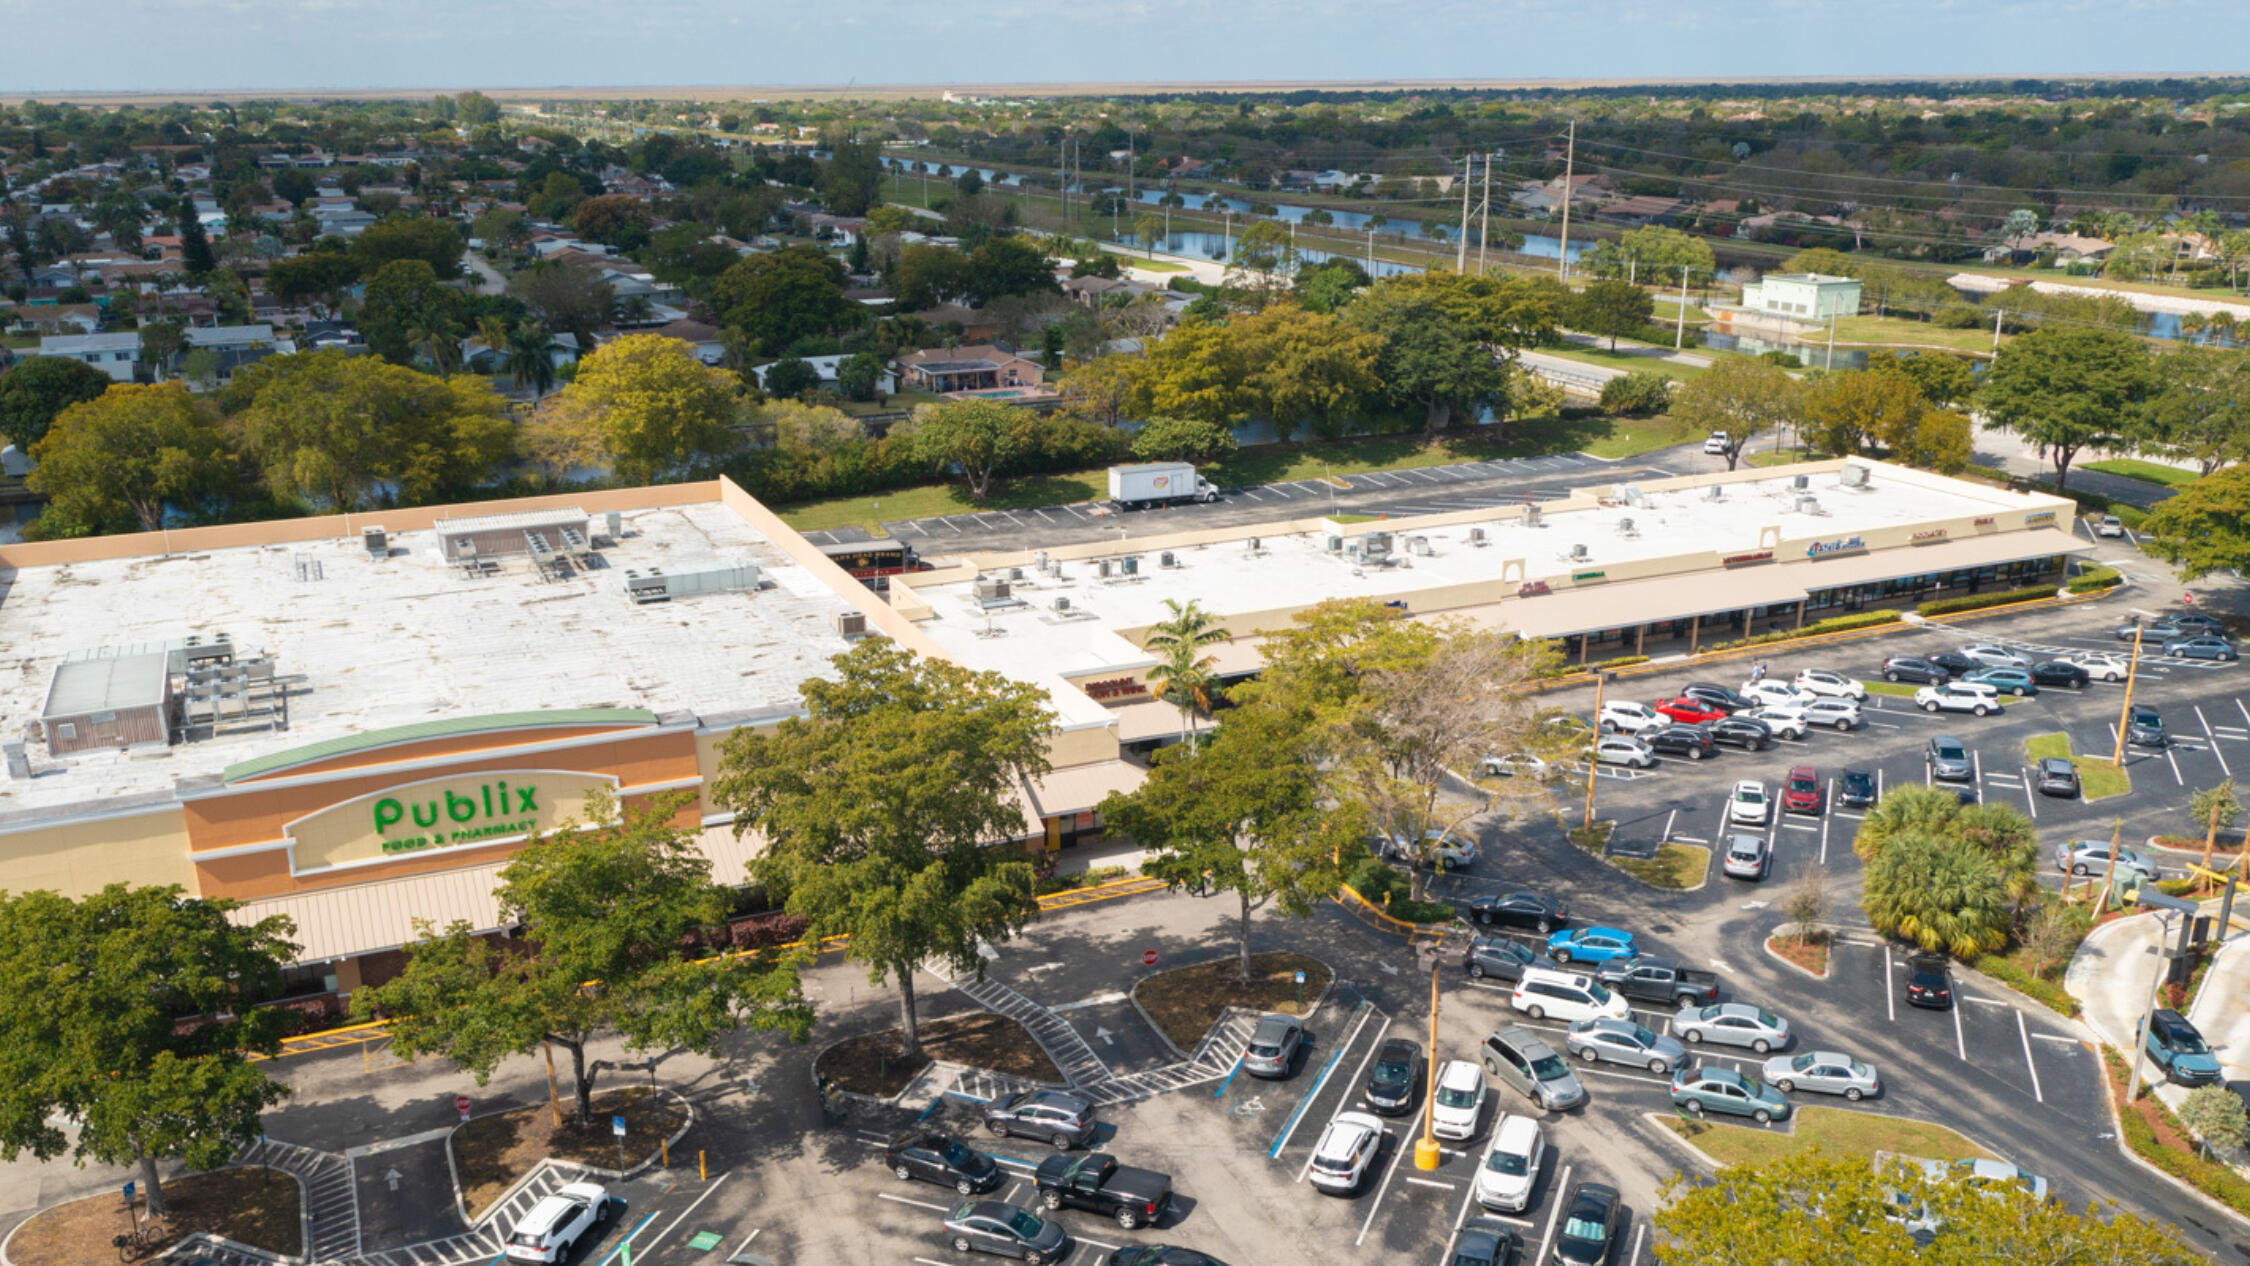 Aerial view of Tamarac Town Square including parking lot and neighborhood in background